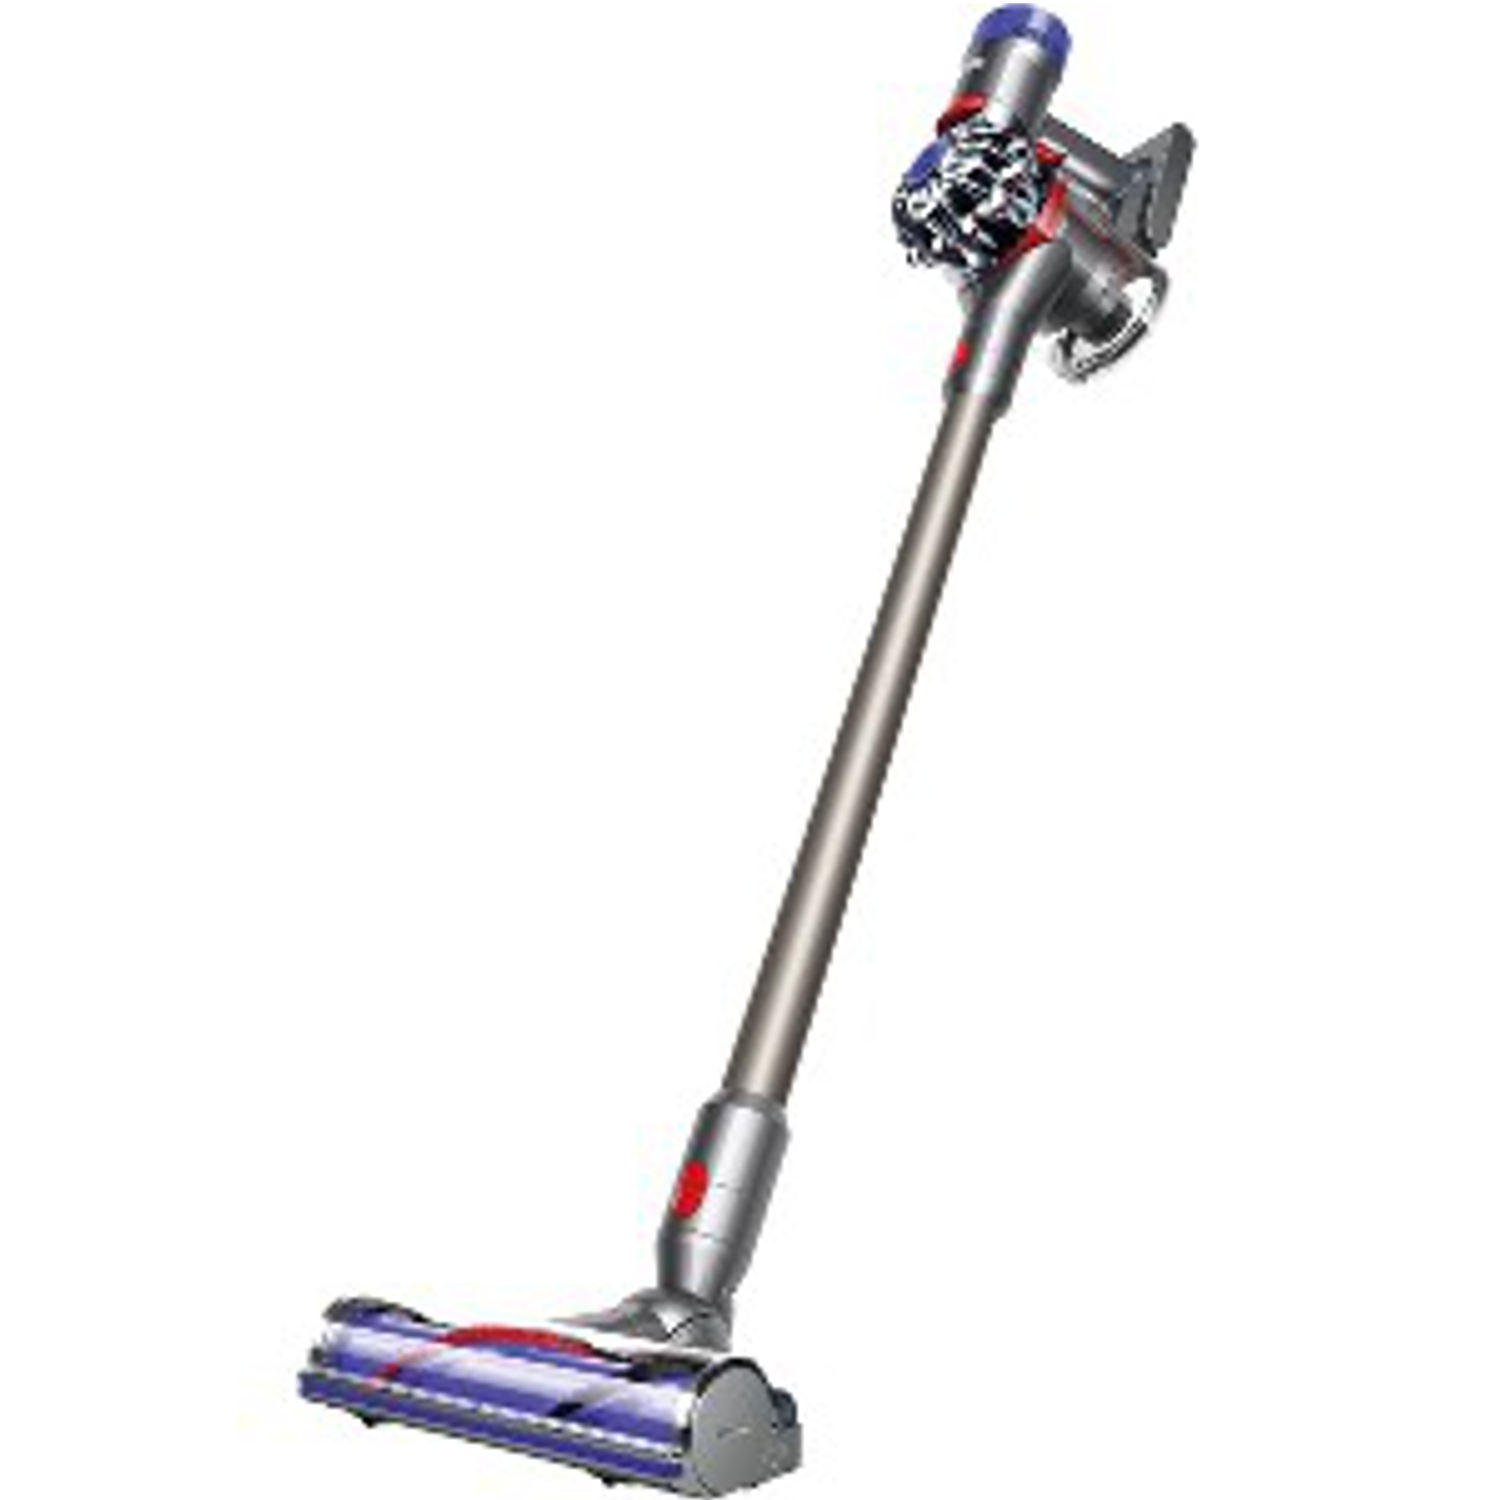 Dyson V8ANIMAL+ Cordless Vacuum Cleaner - 40 Minute Run Time - 0